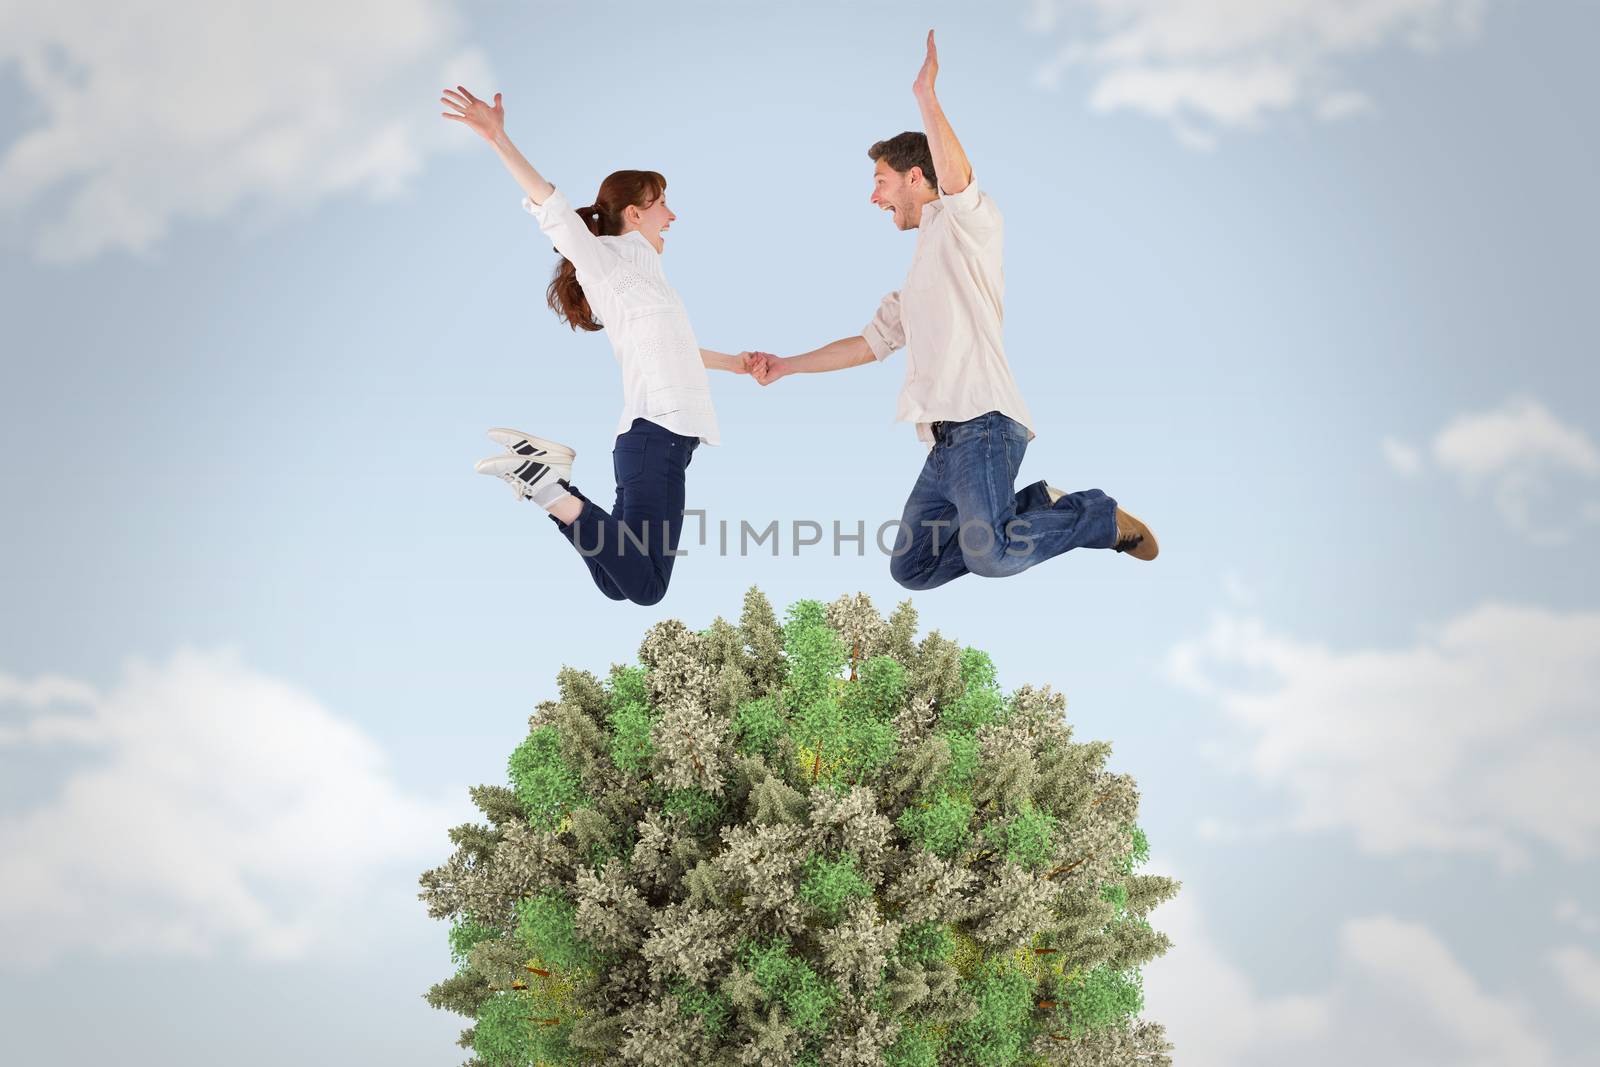 Couple jumping and holding hands against blue sky